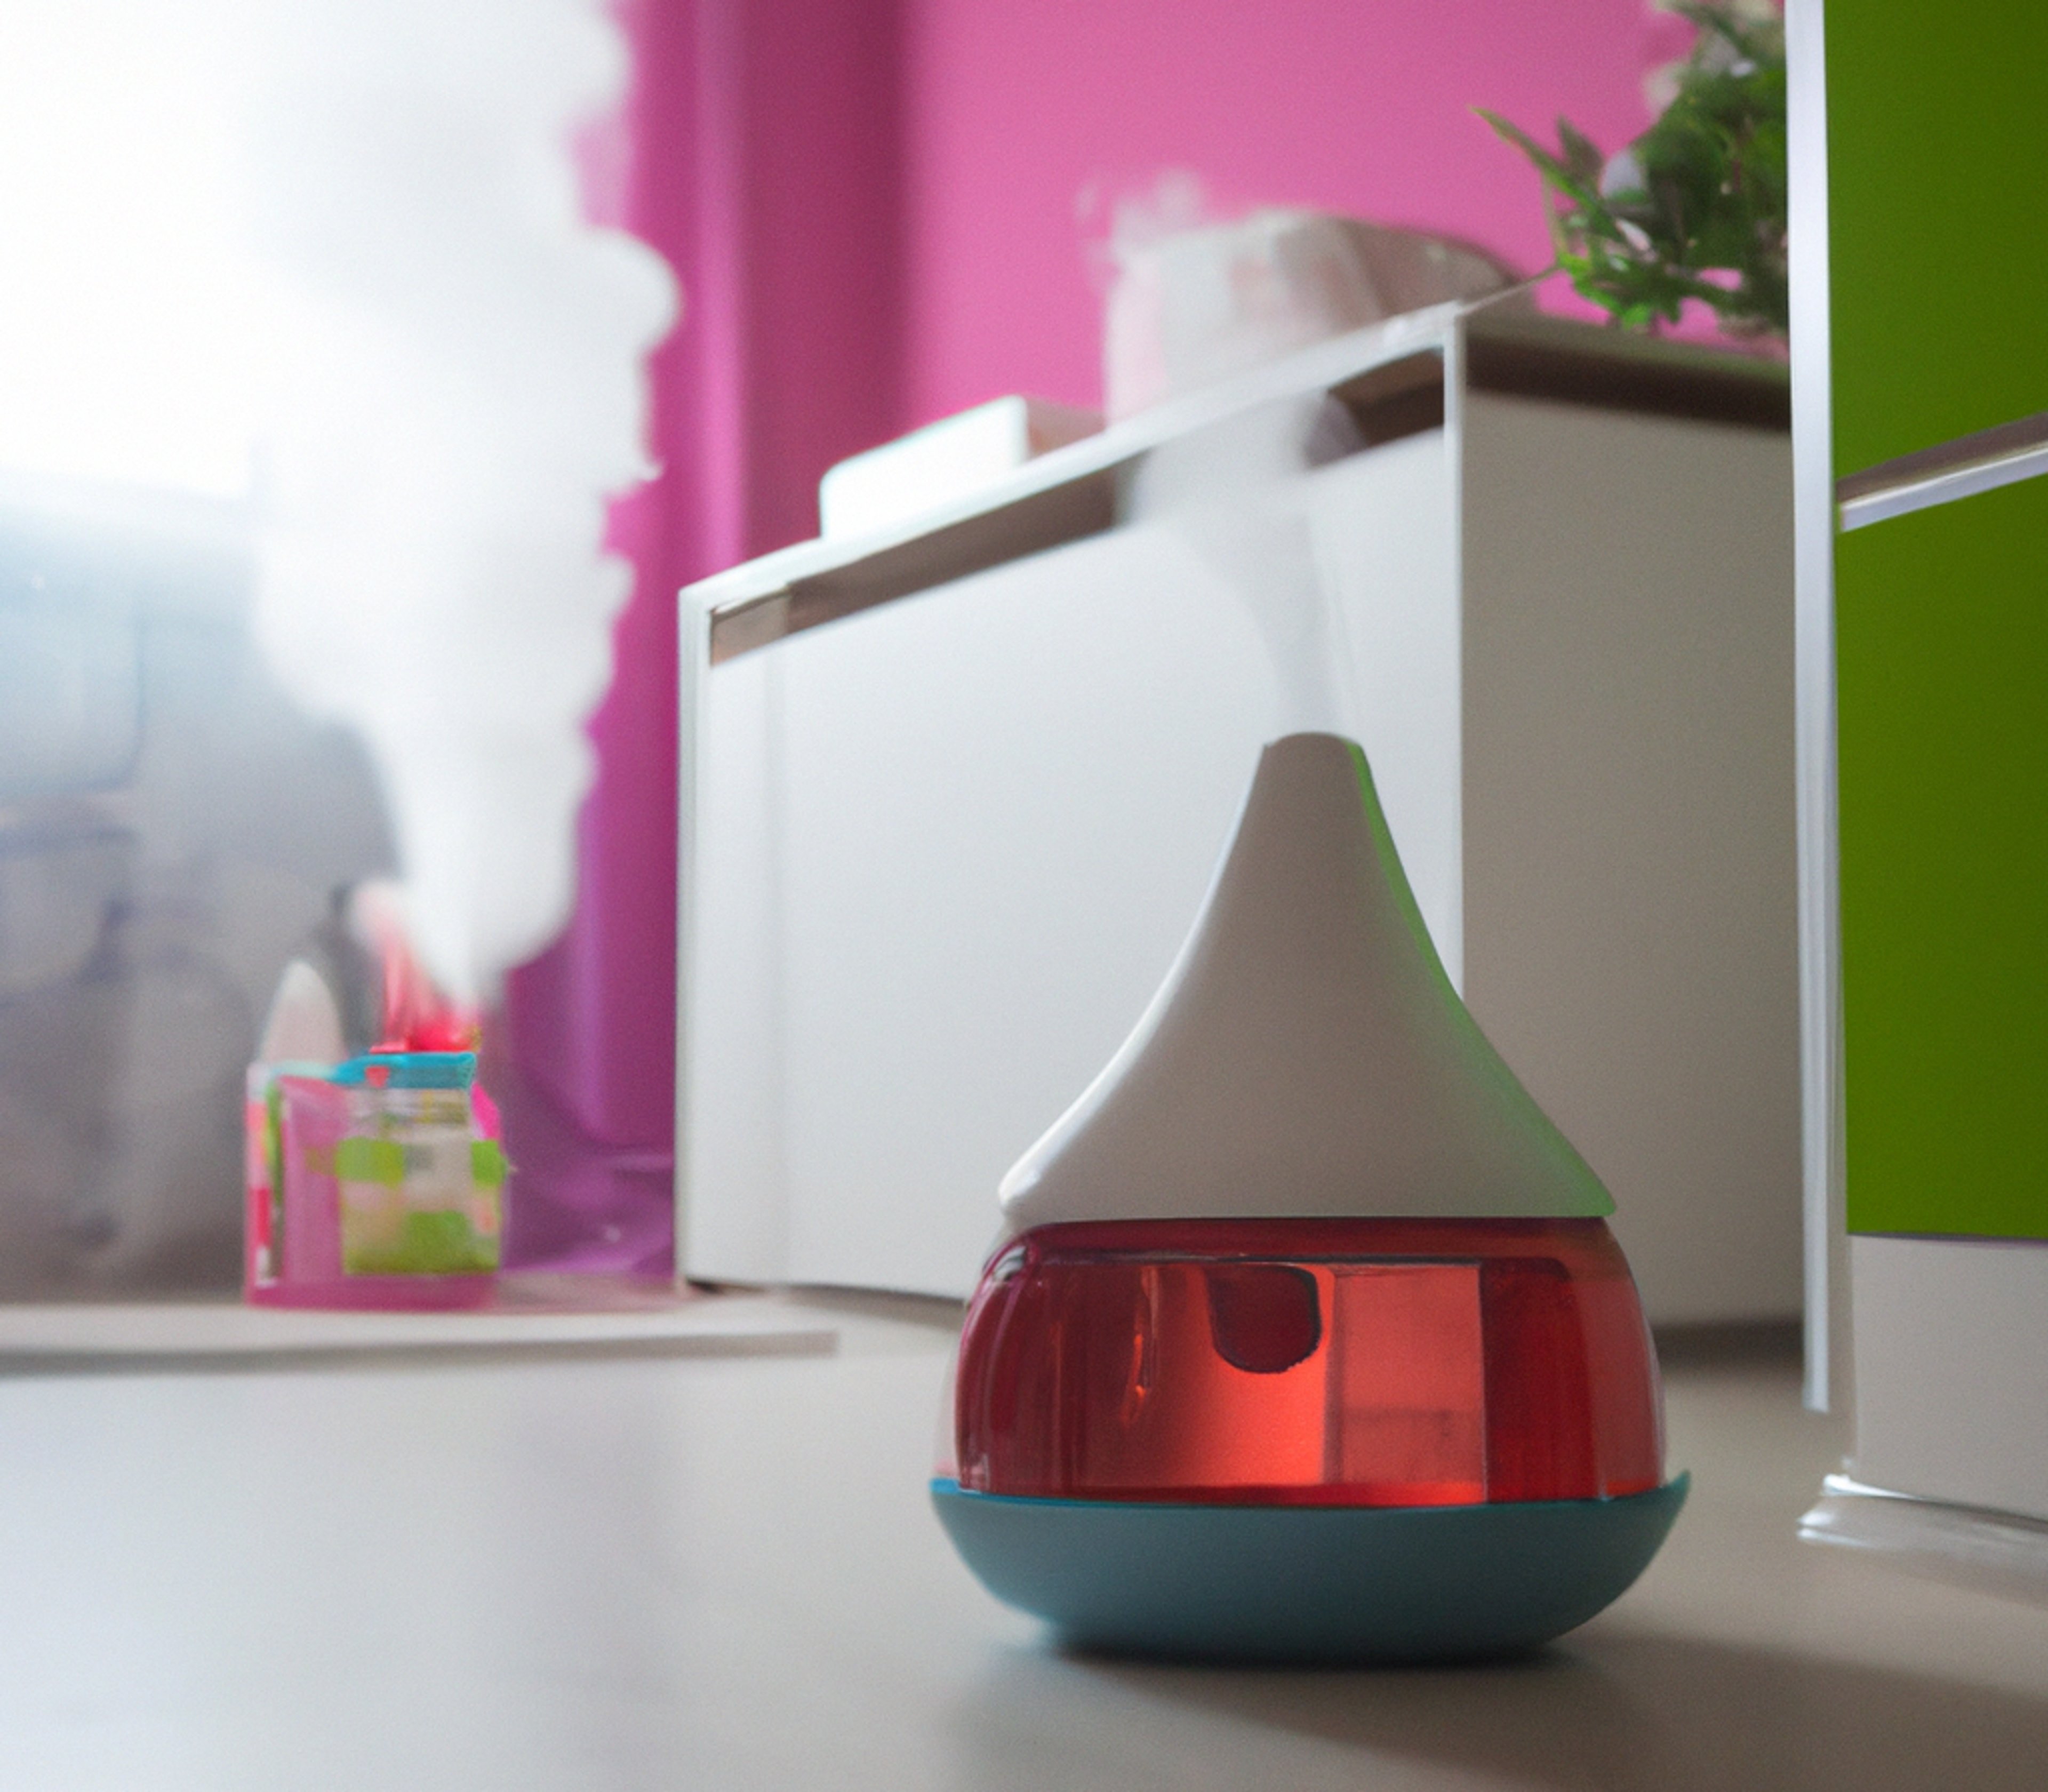 Choosing the Best Humidifier for Your Little One's Room